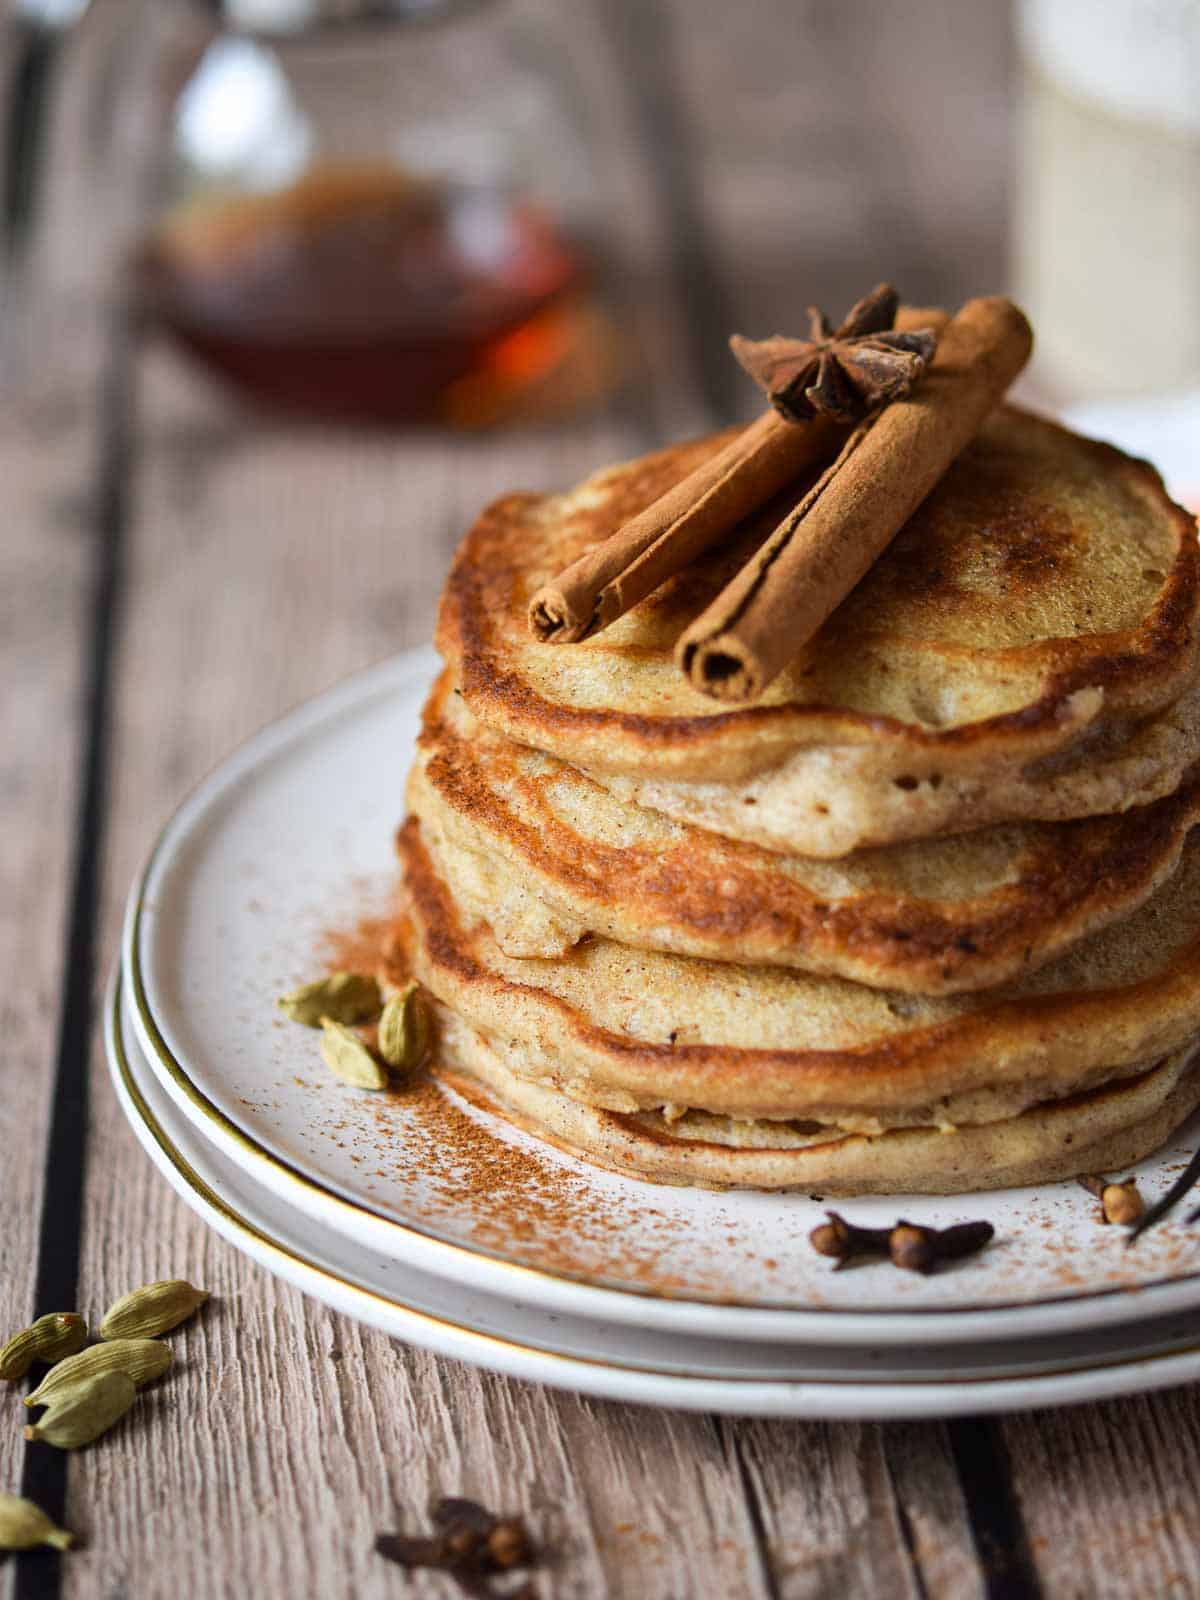 Close-up of pancakes on a plate with cinnamon sticks and spices on top.